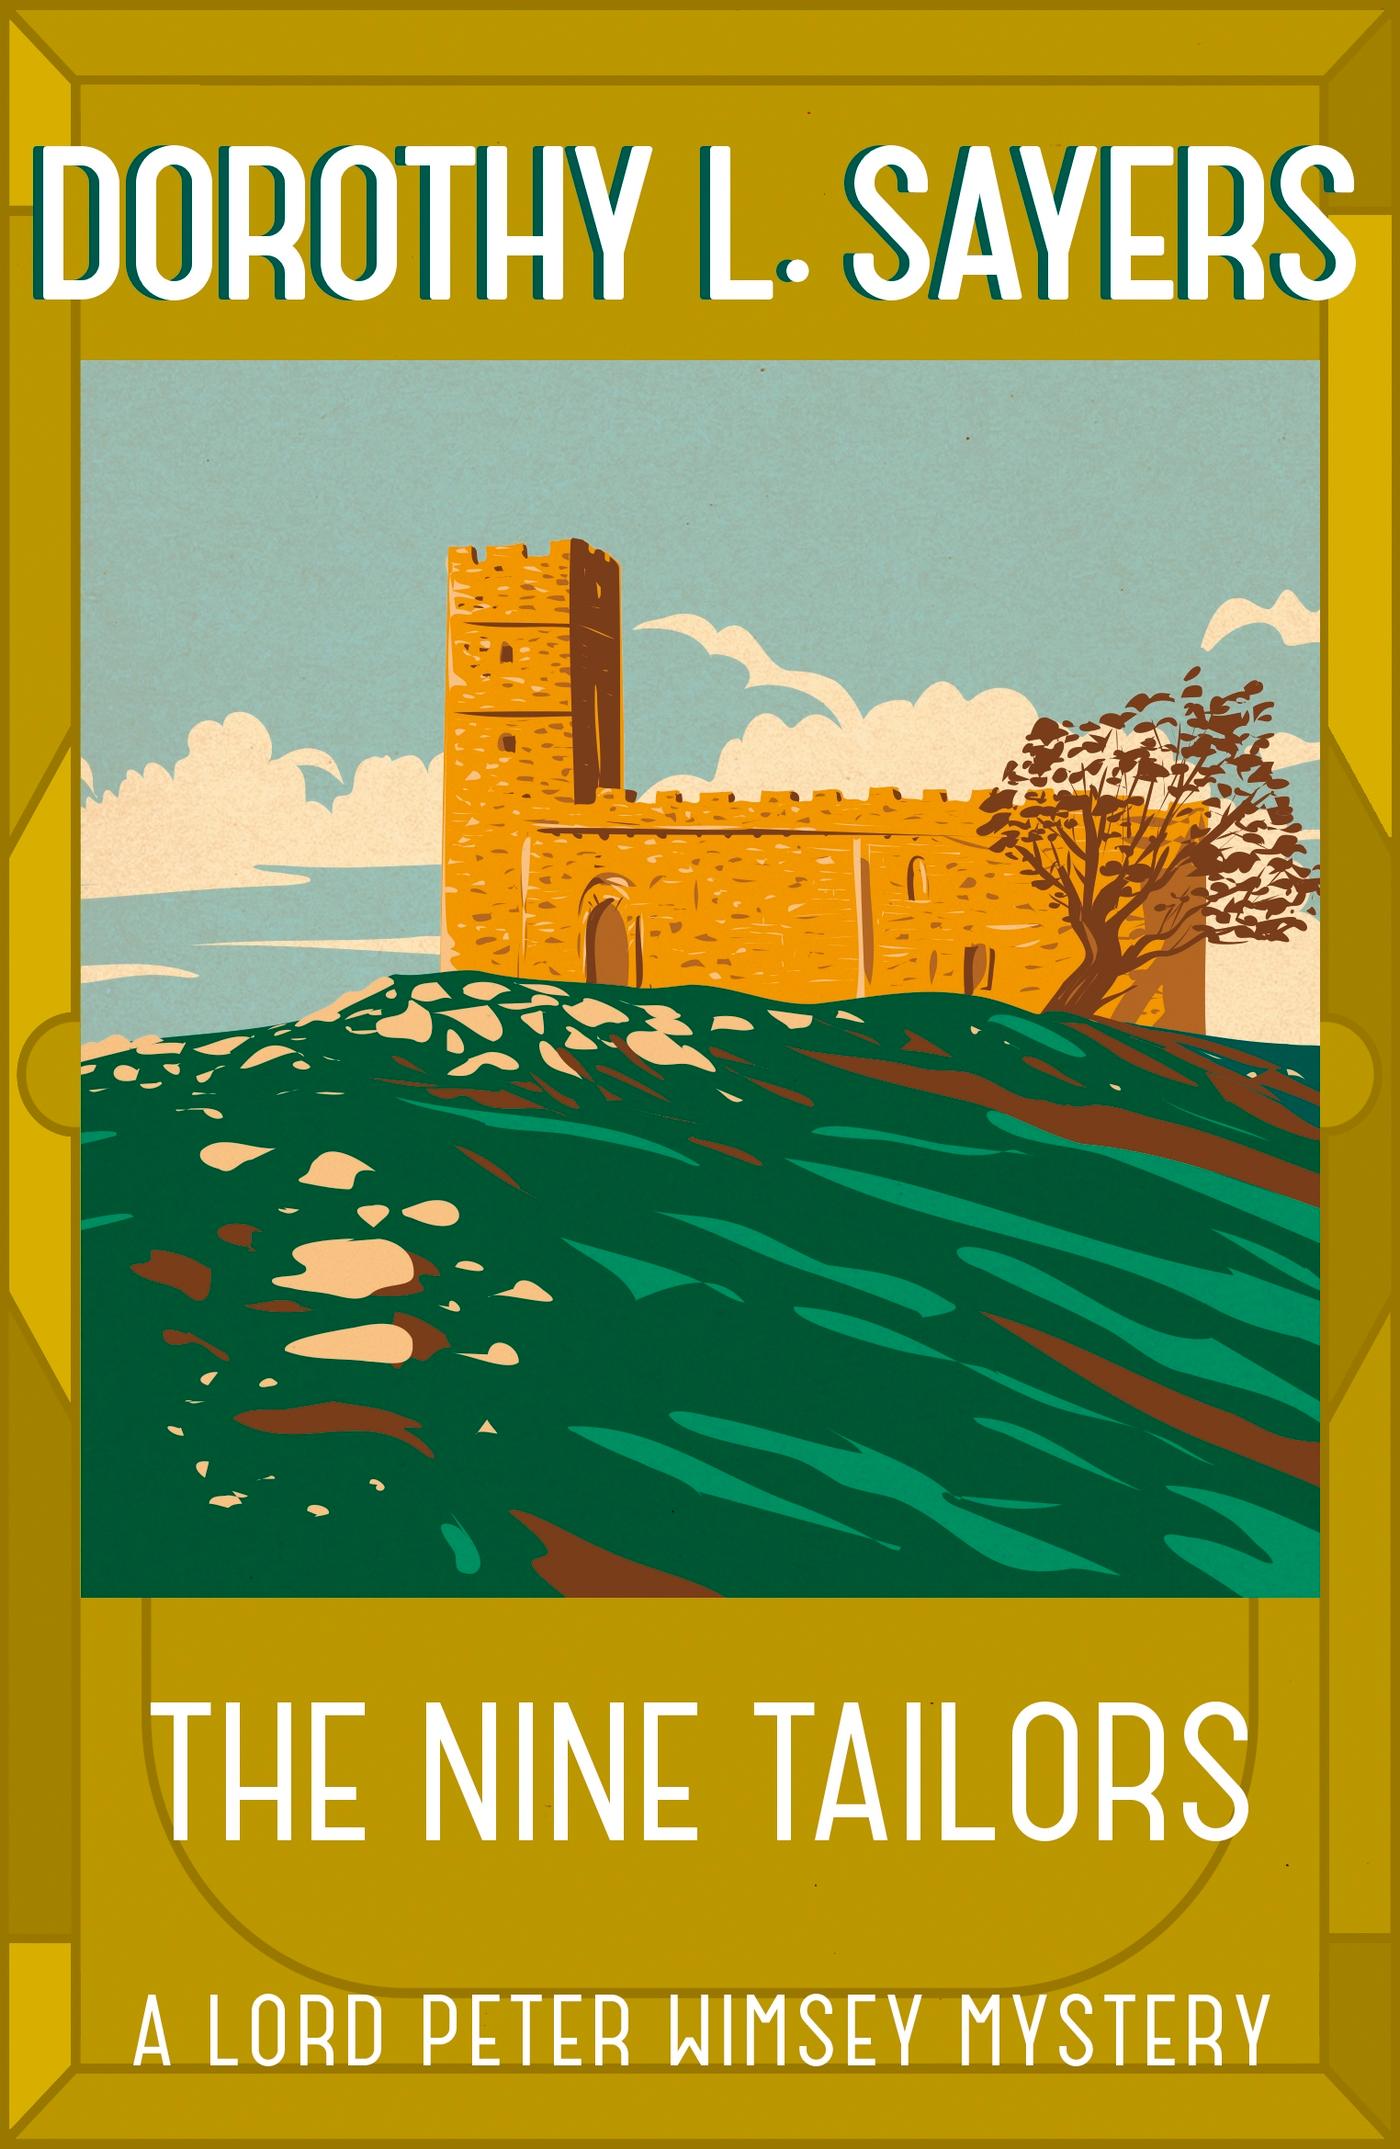 The Nine Tailors | Lord Peter Wimsey Book 11 | Dorothy L. Sayers | Taschenbuch | New English Library (nel) | 374 S. | Englisch | 2016 | Hodder And Stoughton Ltd. | EAN 9781473621398 - Sayers, Dorothy L.